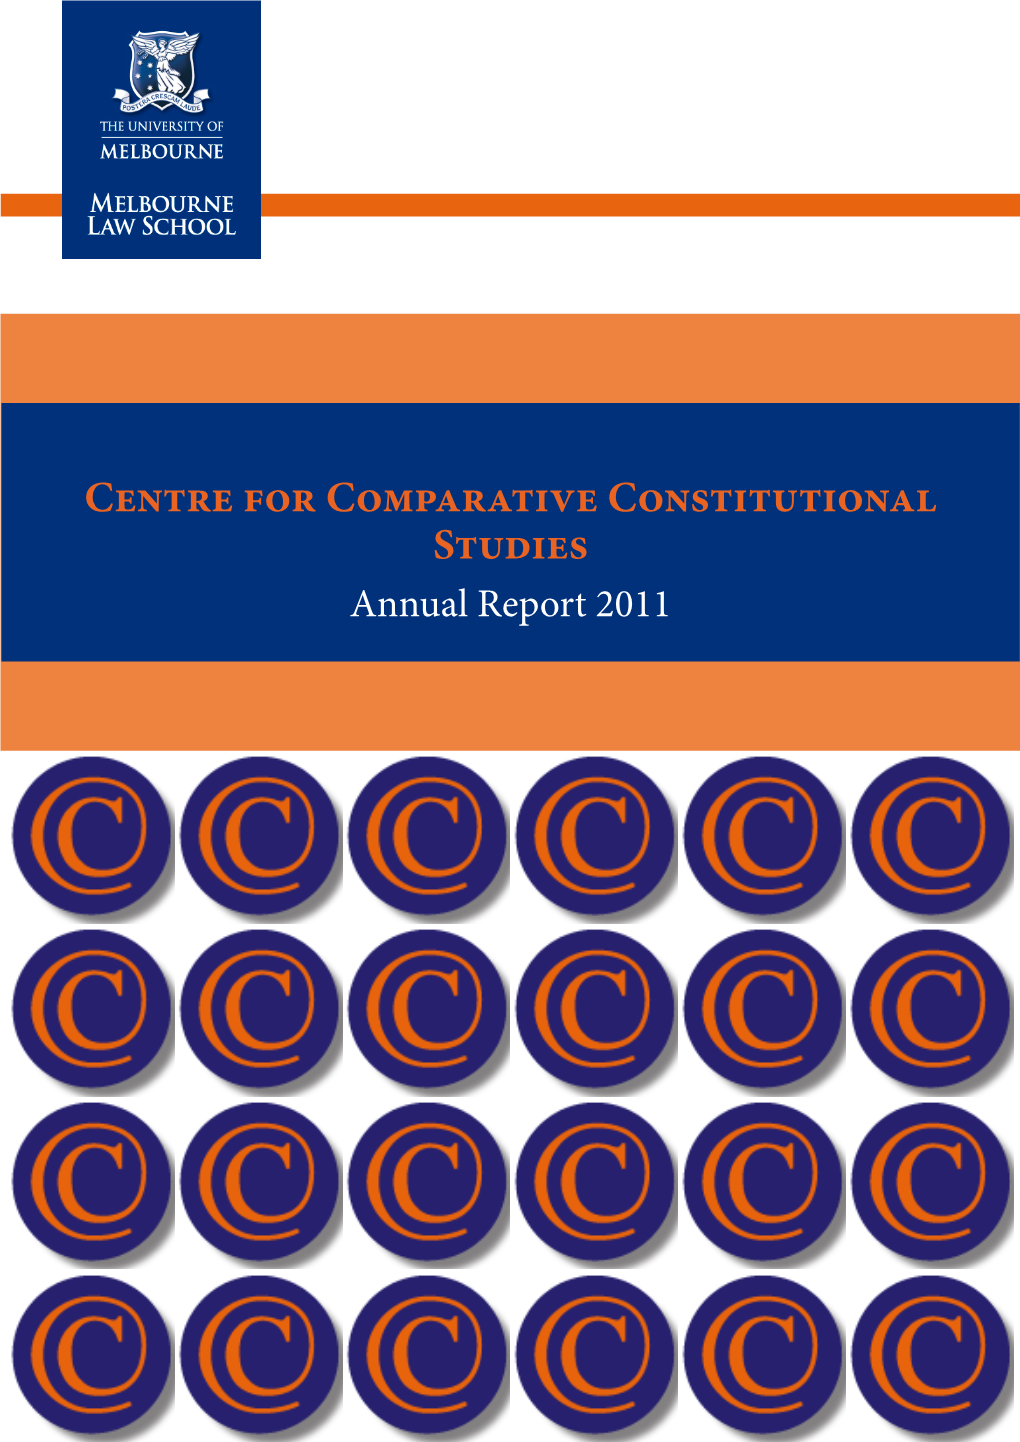 Centre for Comparative Constitutional Studies Annual Report 2011